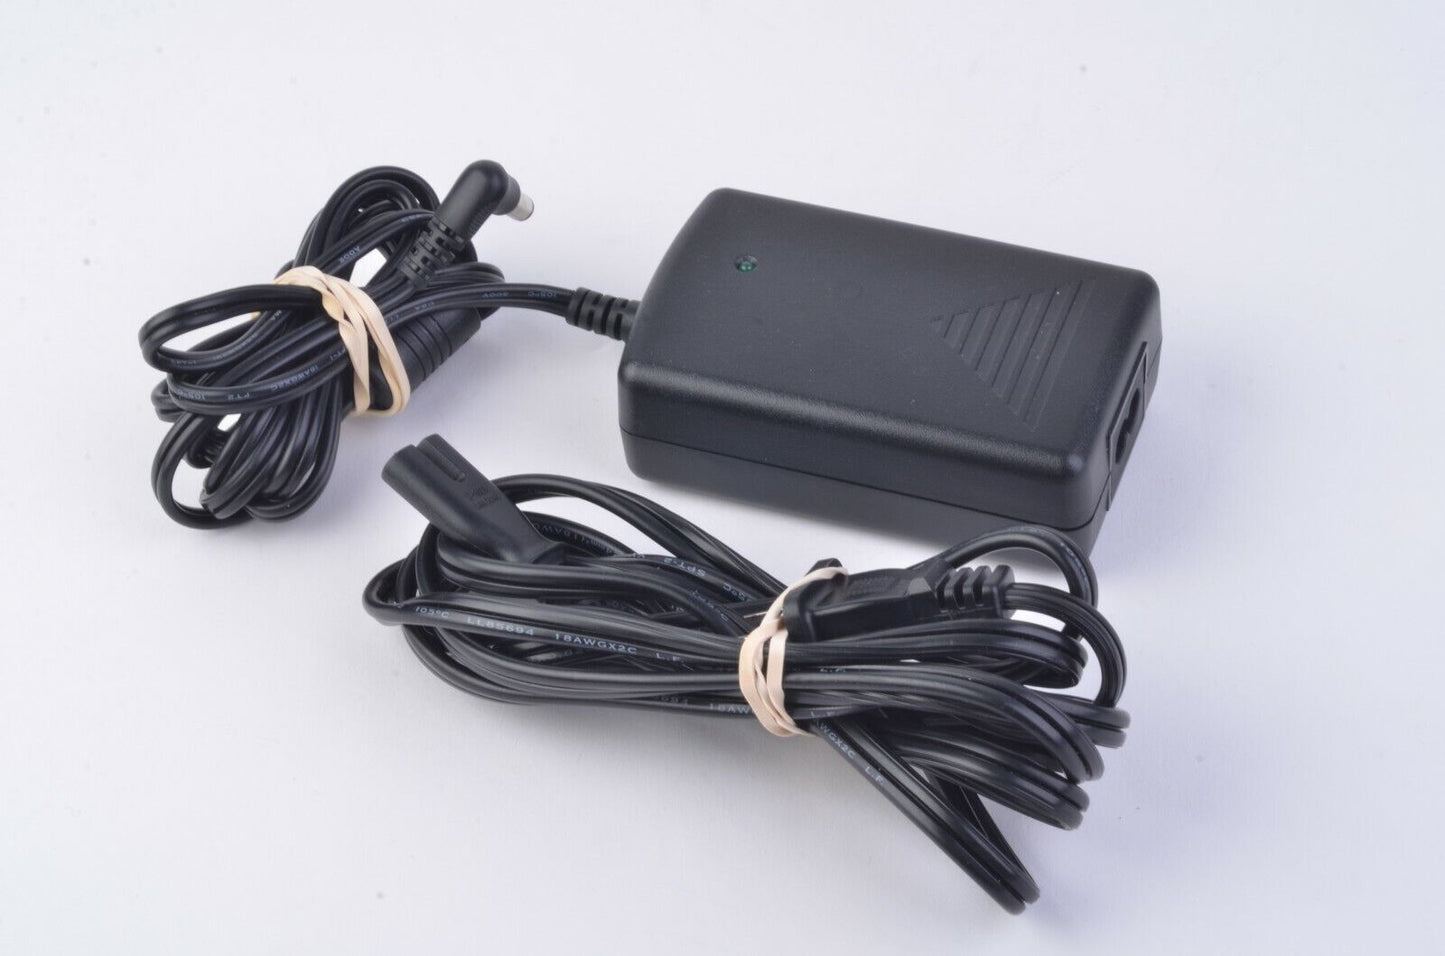 MINT- GENUINE DYMO SWITCHING POWER ADAPTER DSA-0421S-24 2 +24V 1.75A